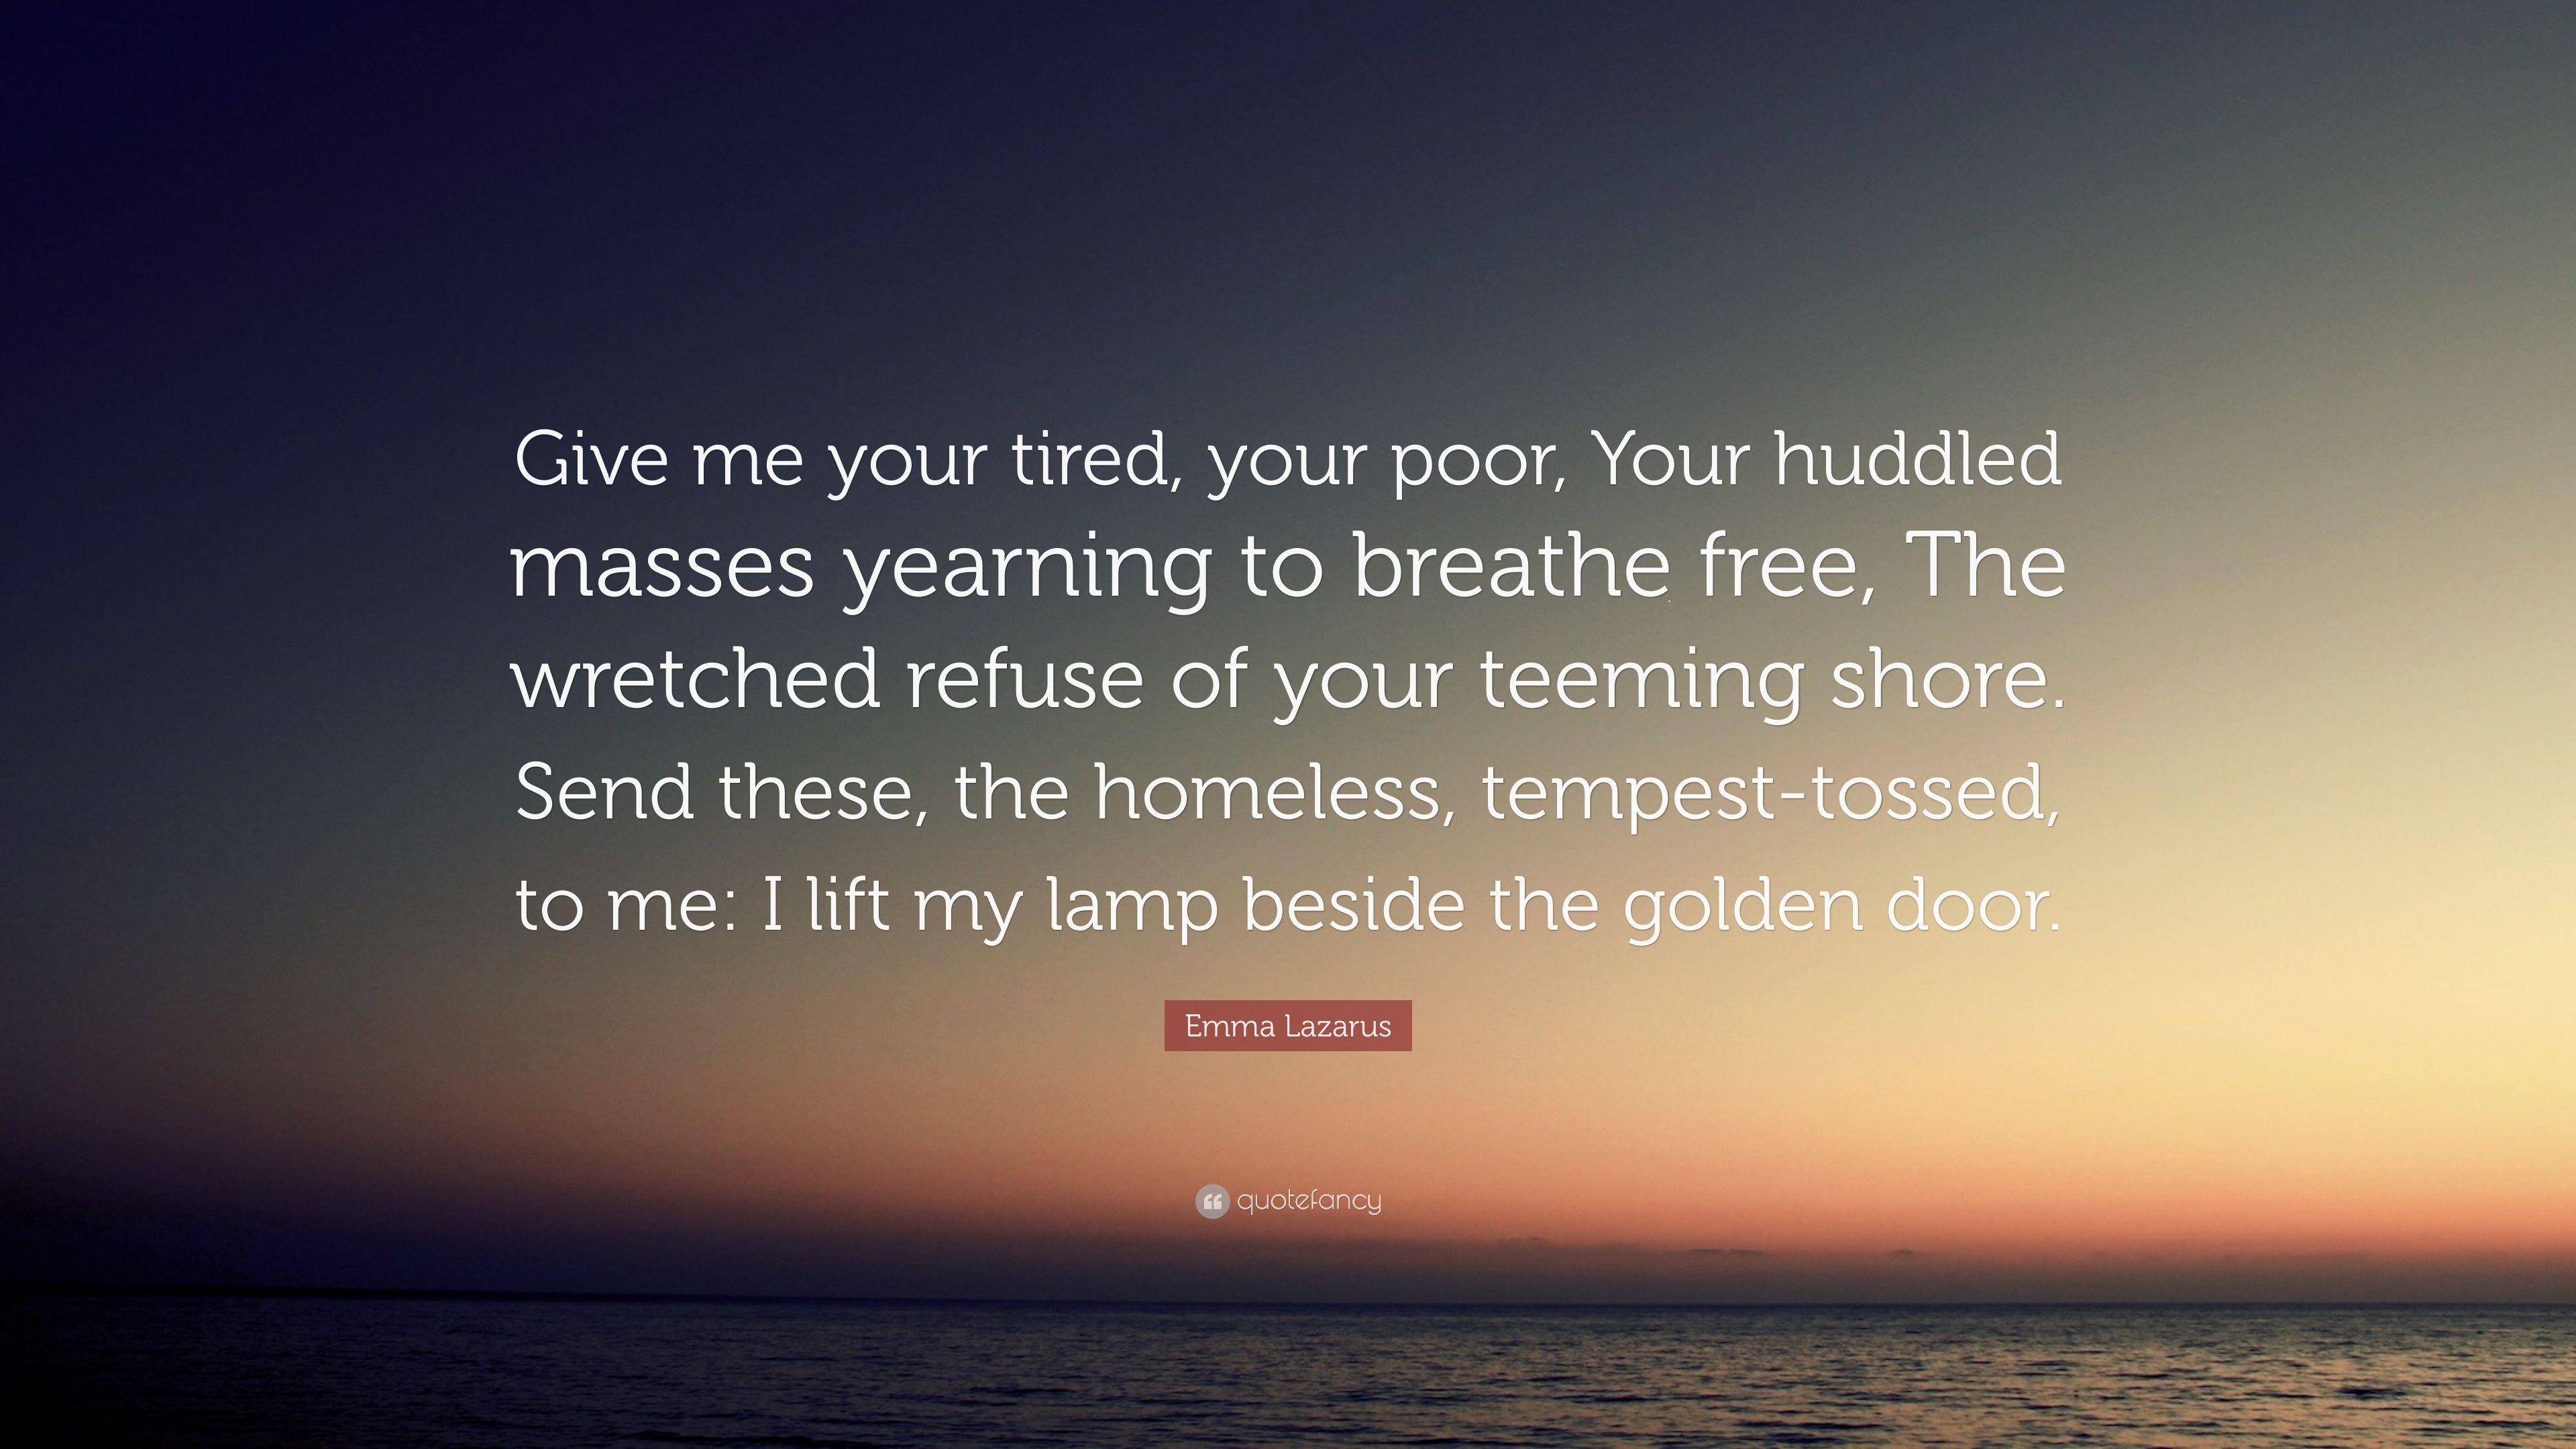 Emma Lazarus Quote: “Give me your tired, your poor, Your huddled